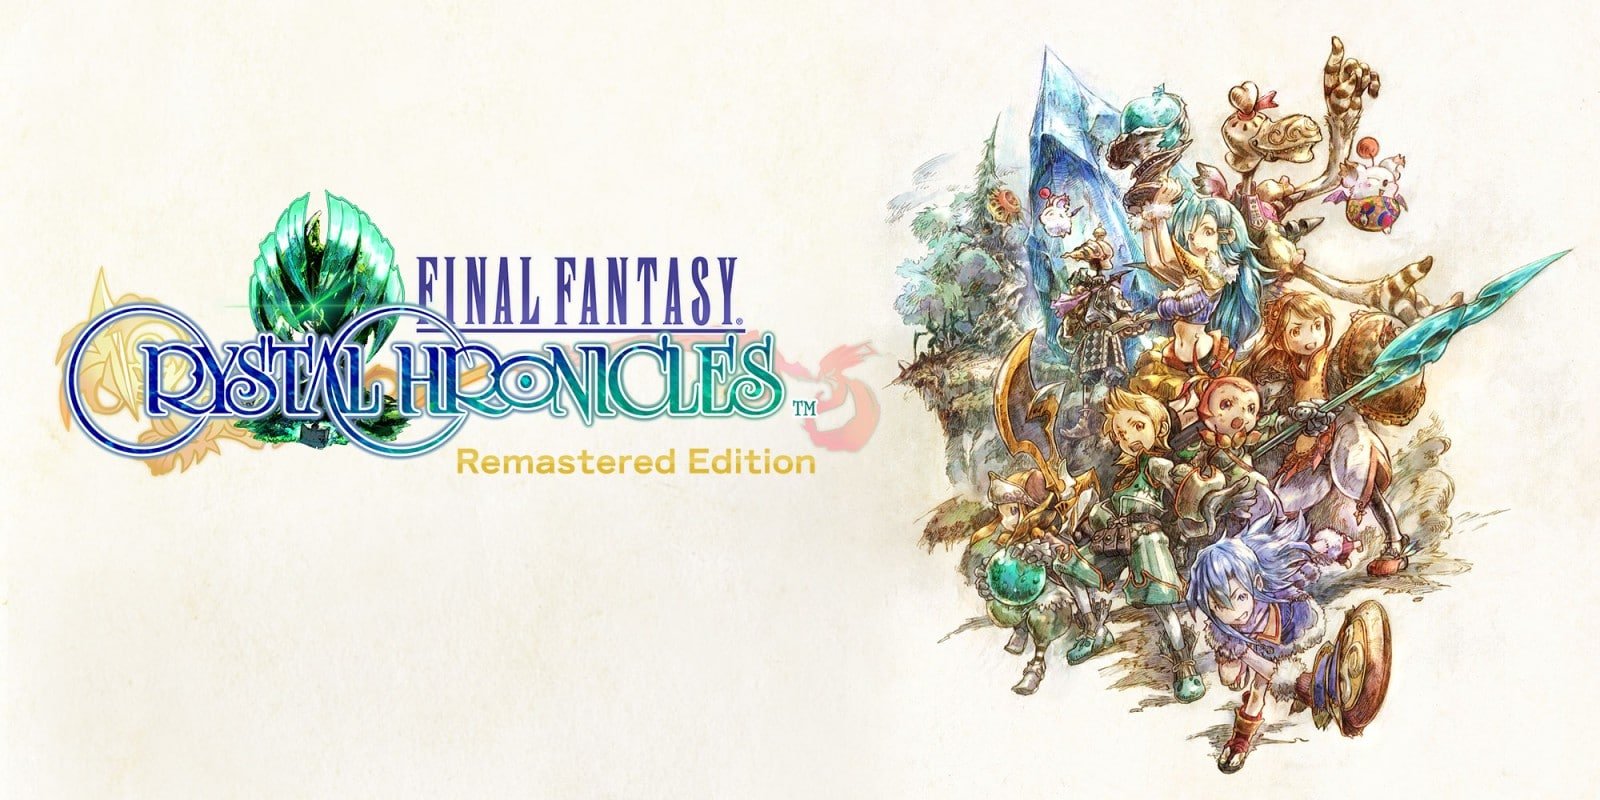 Inside Final Fantasy Crystal Chronicles Remastered Edition – Developer Diary